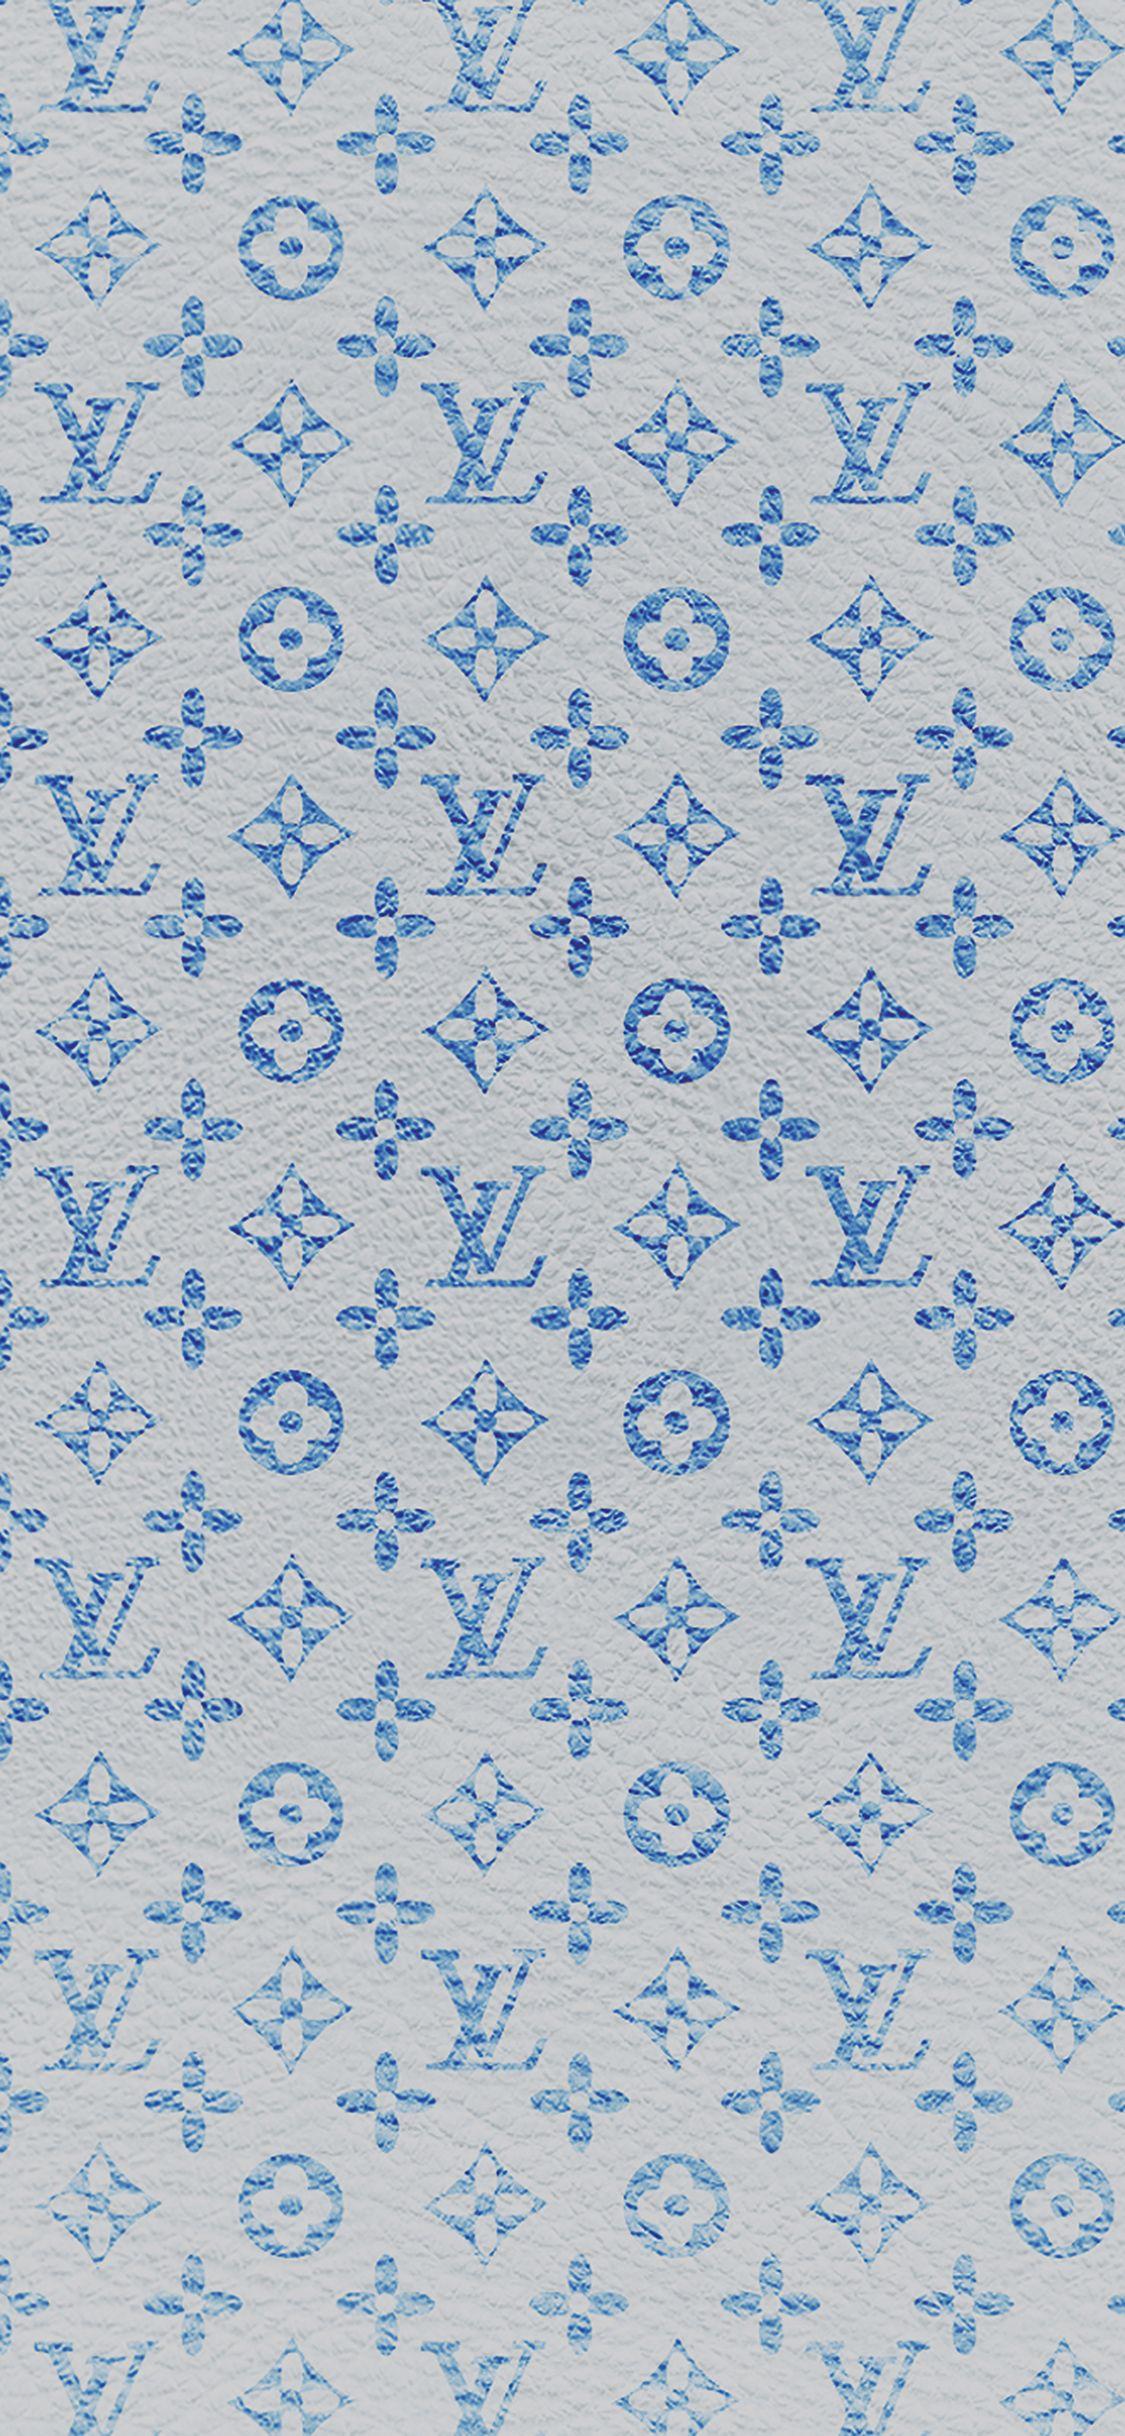 louis vuitton iphone wallpaper, For more Brand logo Iphone …